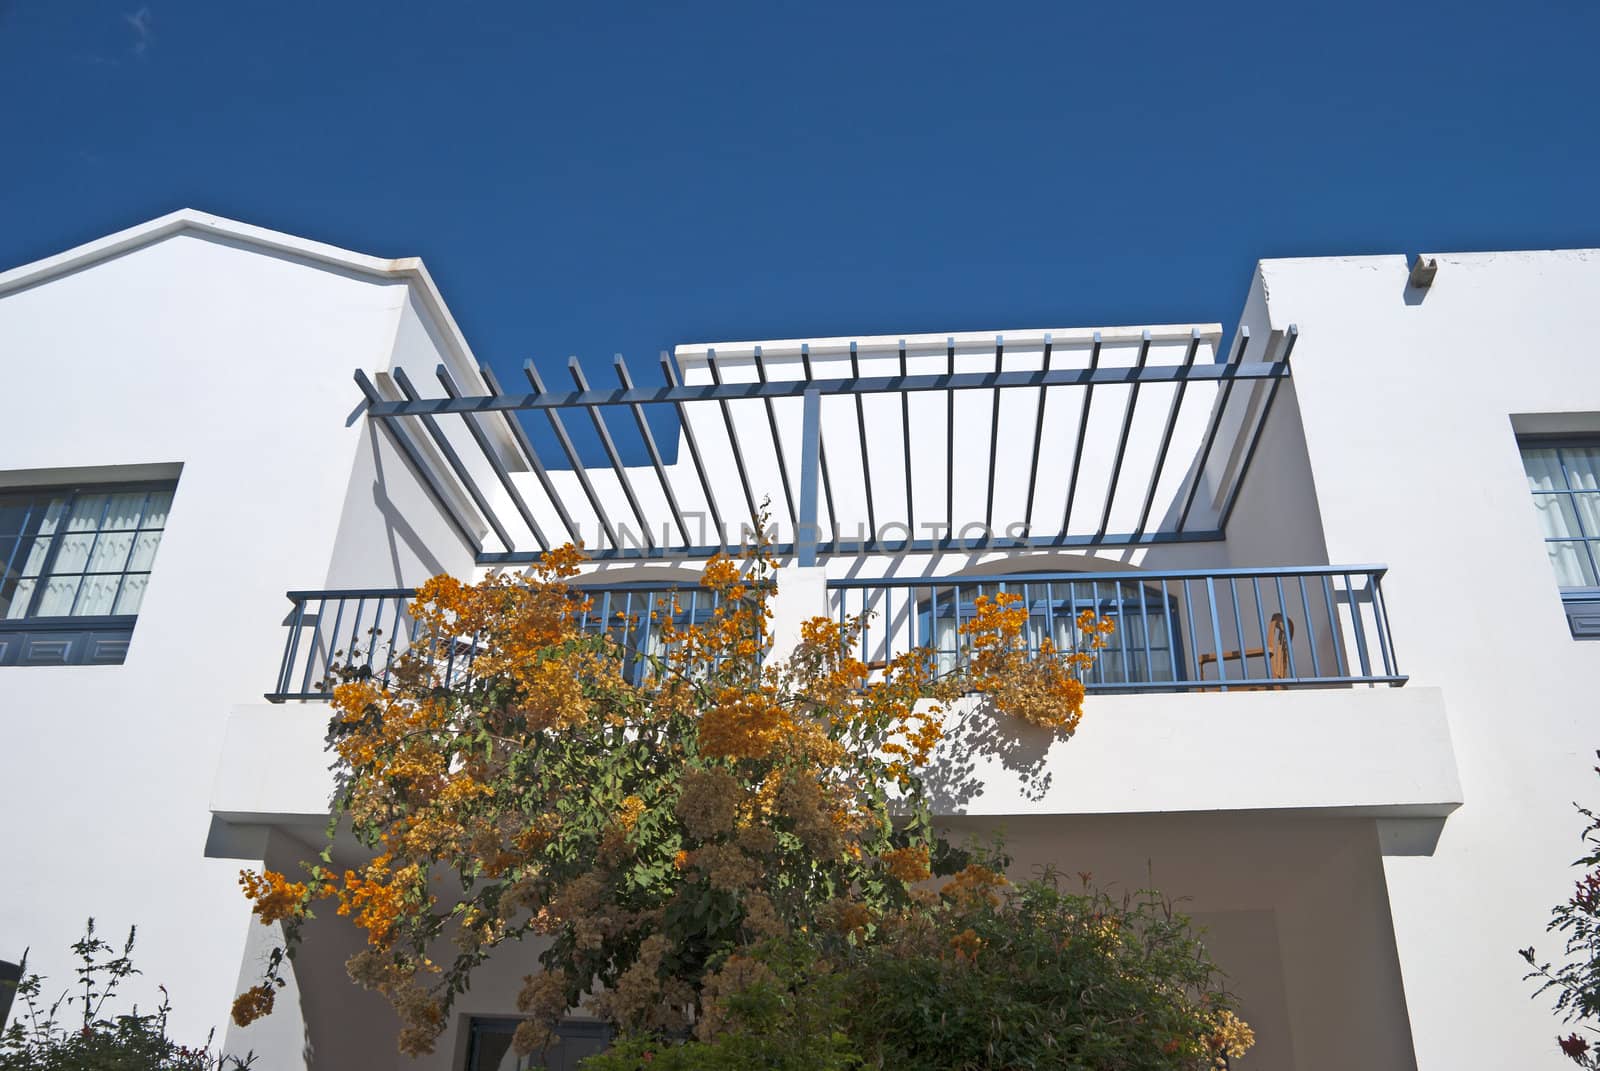 An Orange Bougainvillea Bush growing up a Blue and White Apartment Balcony